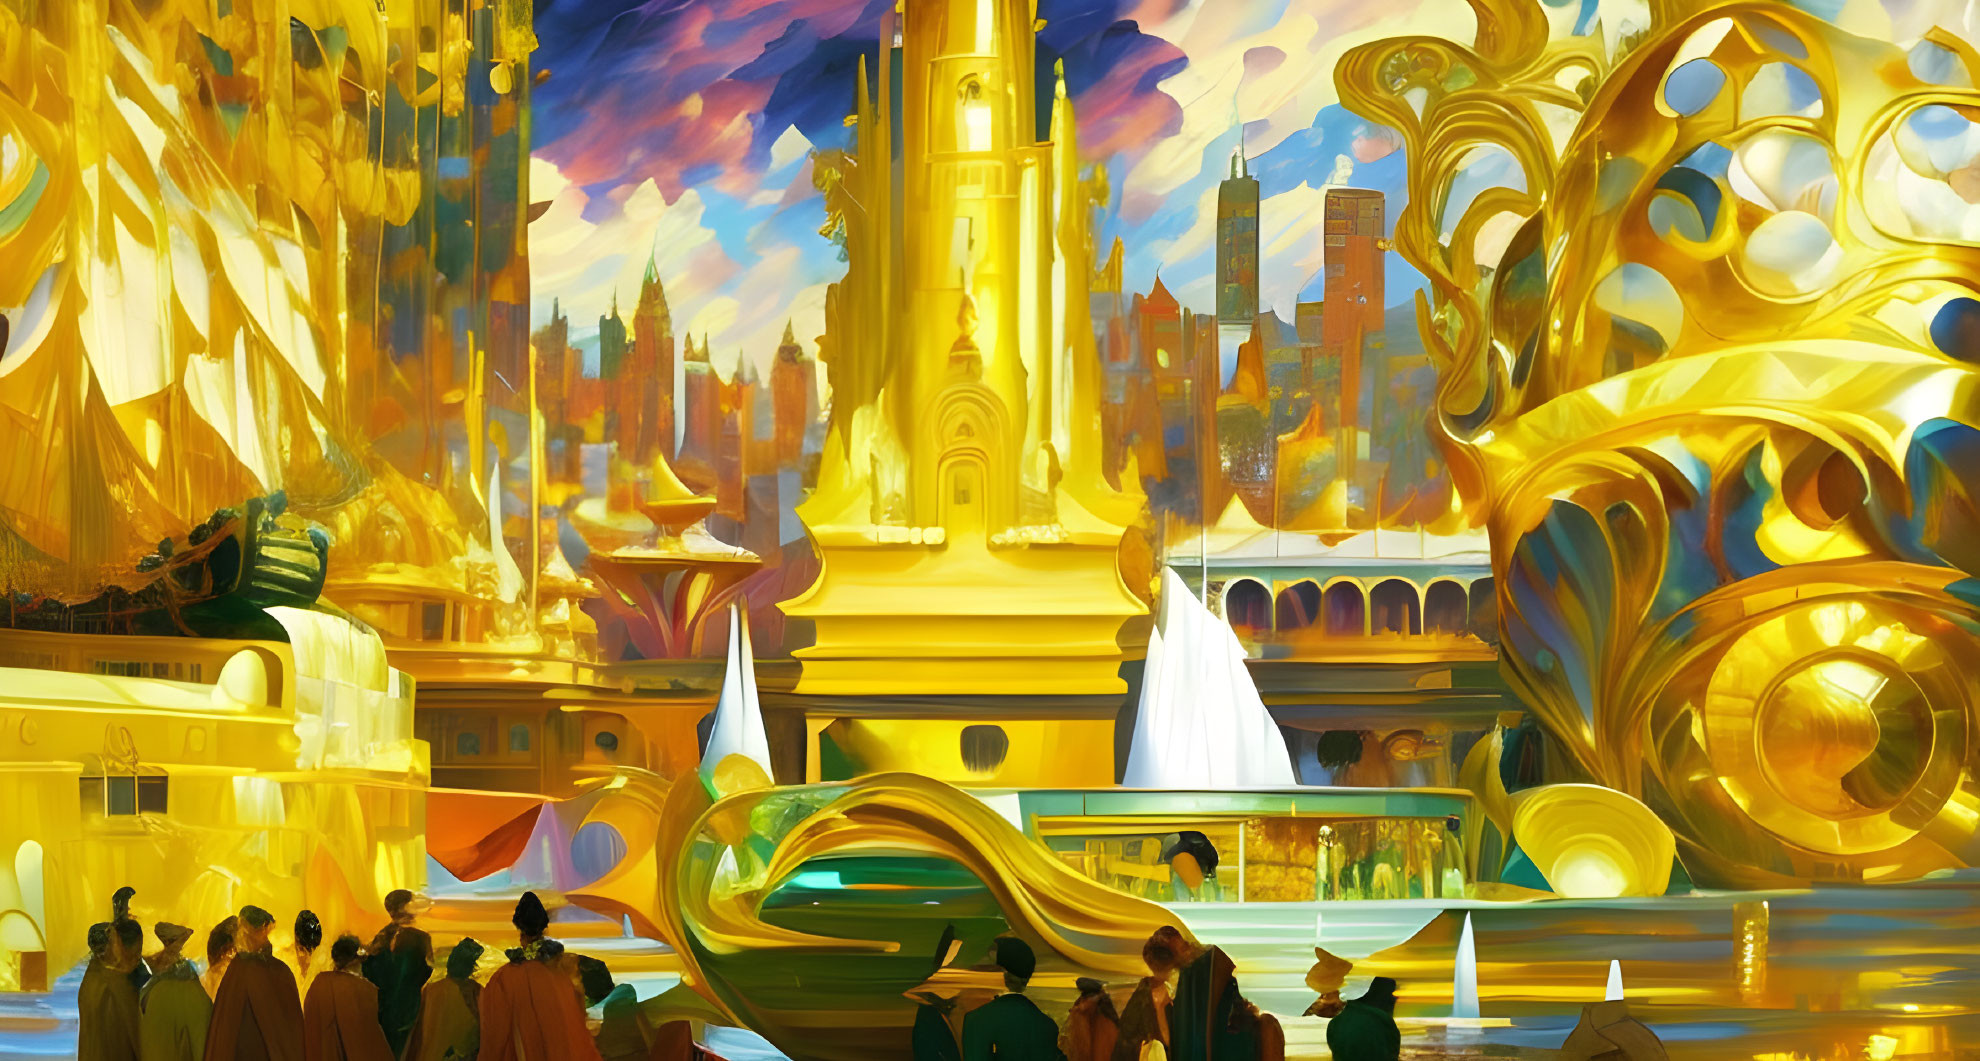 Futuristic cityscape with golden spires, sculptures, colorful attire, and dynamic sky